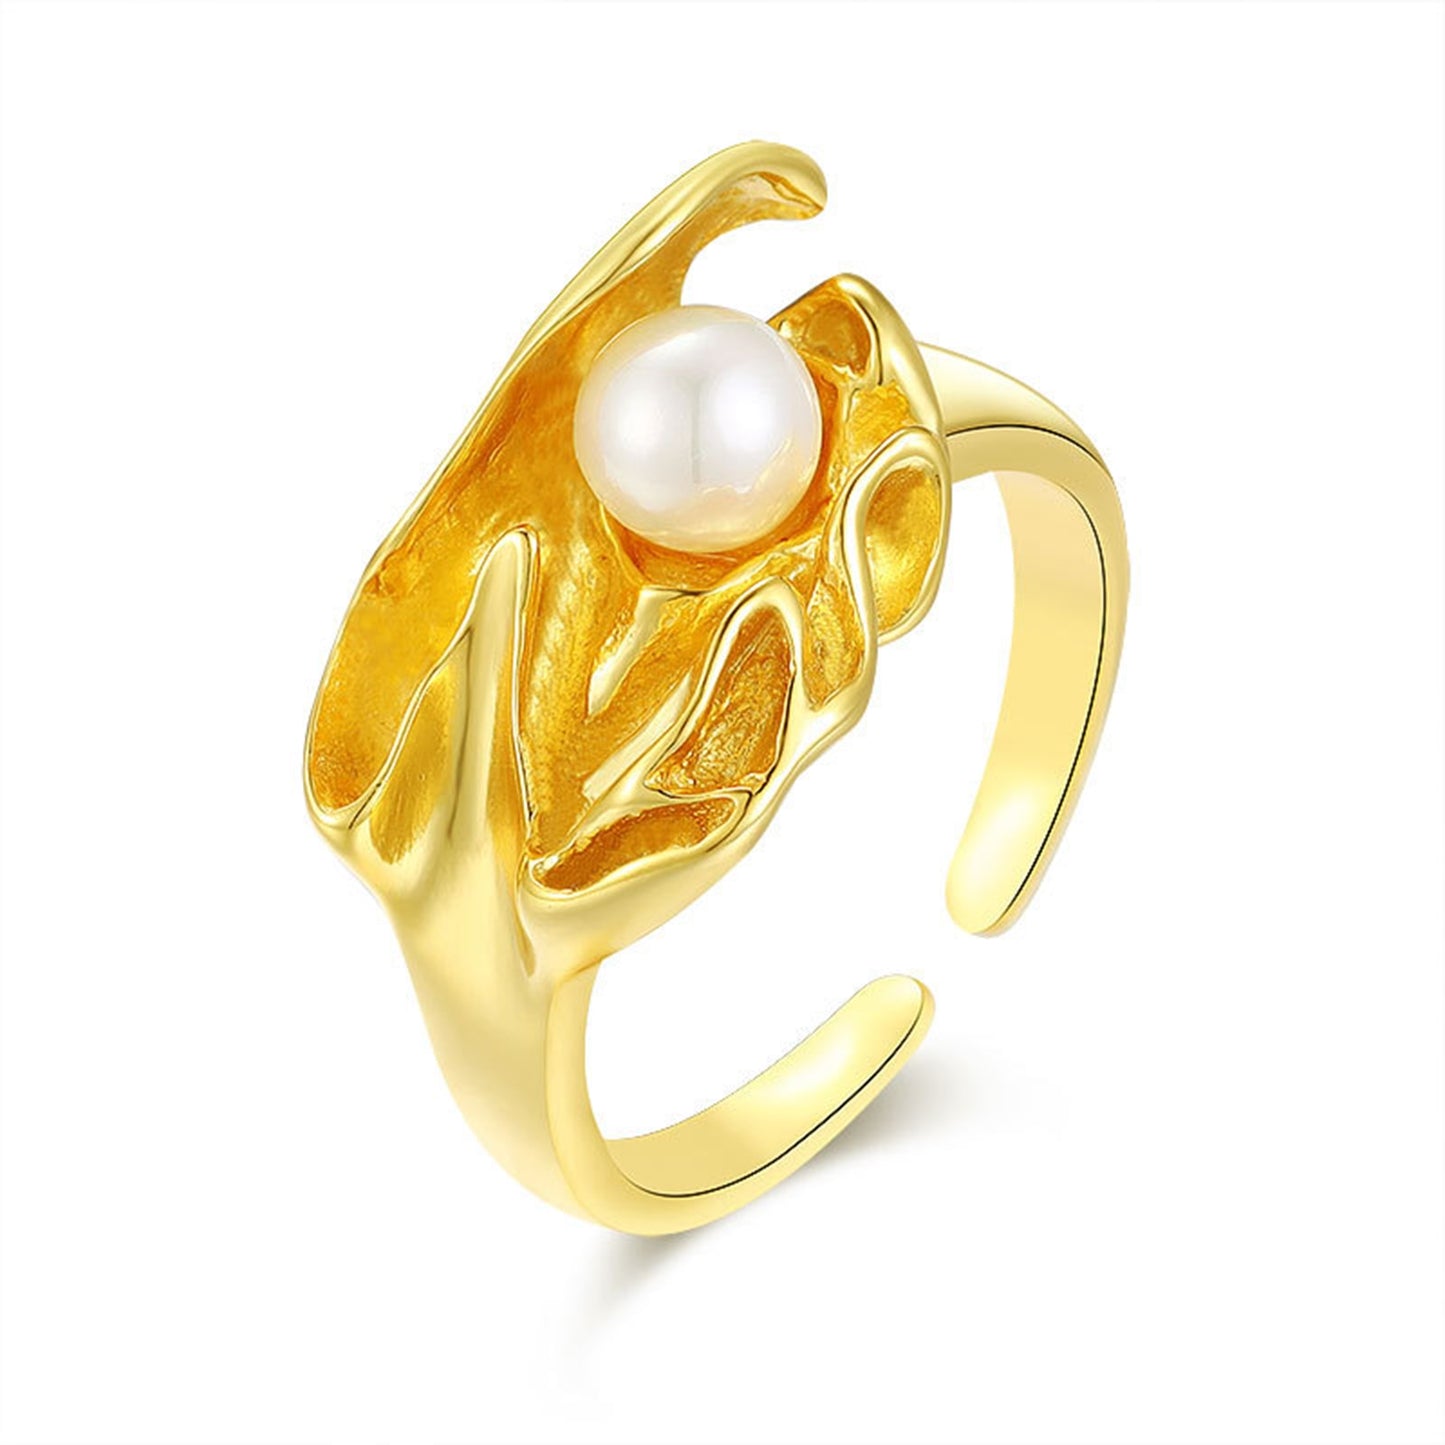 Modern Design Pearl Adjustable Open Ring Sterling Silver S925 18K Gold Plated - Pantsnsox